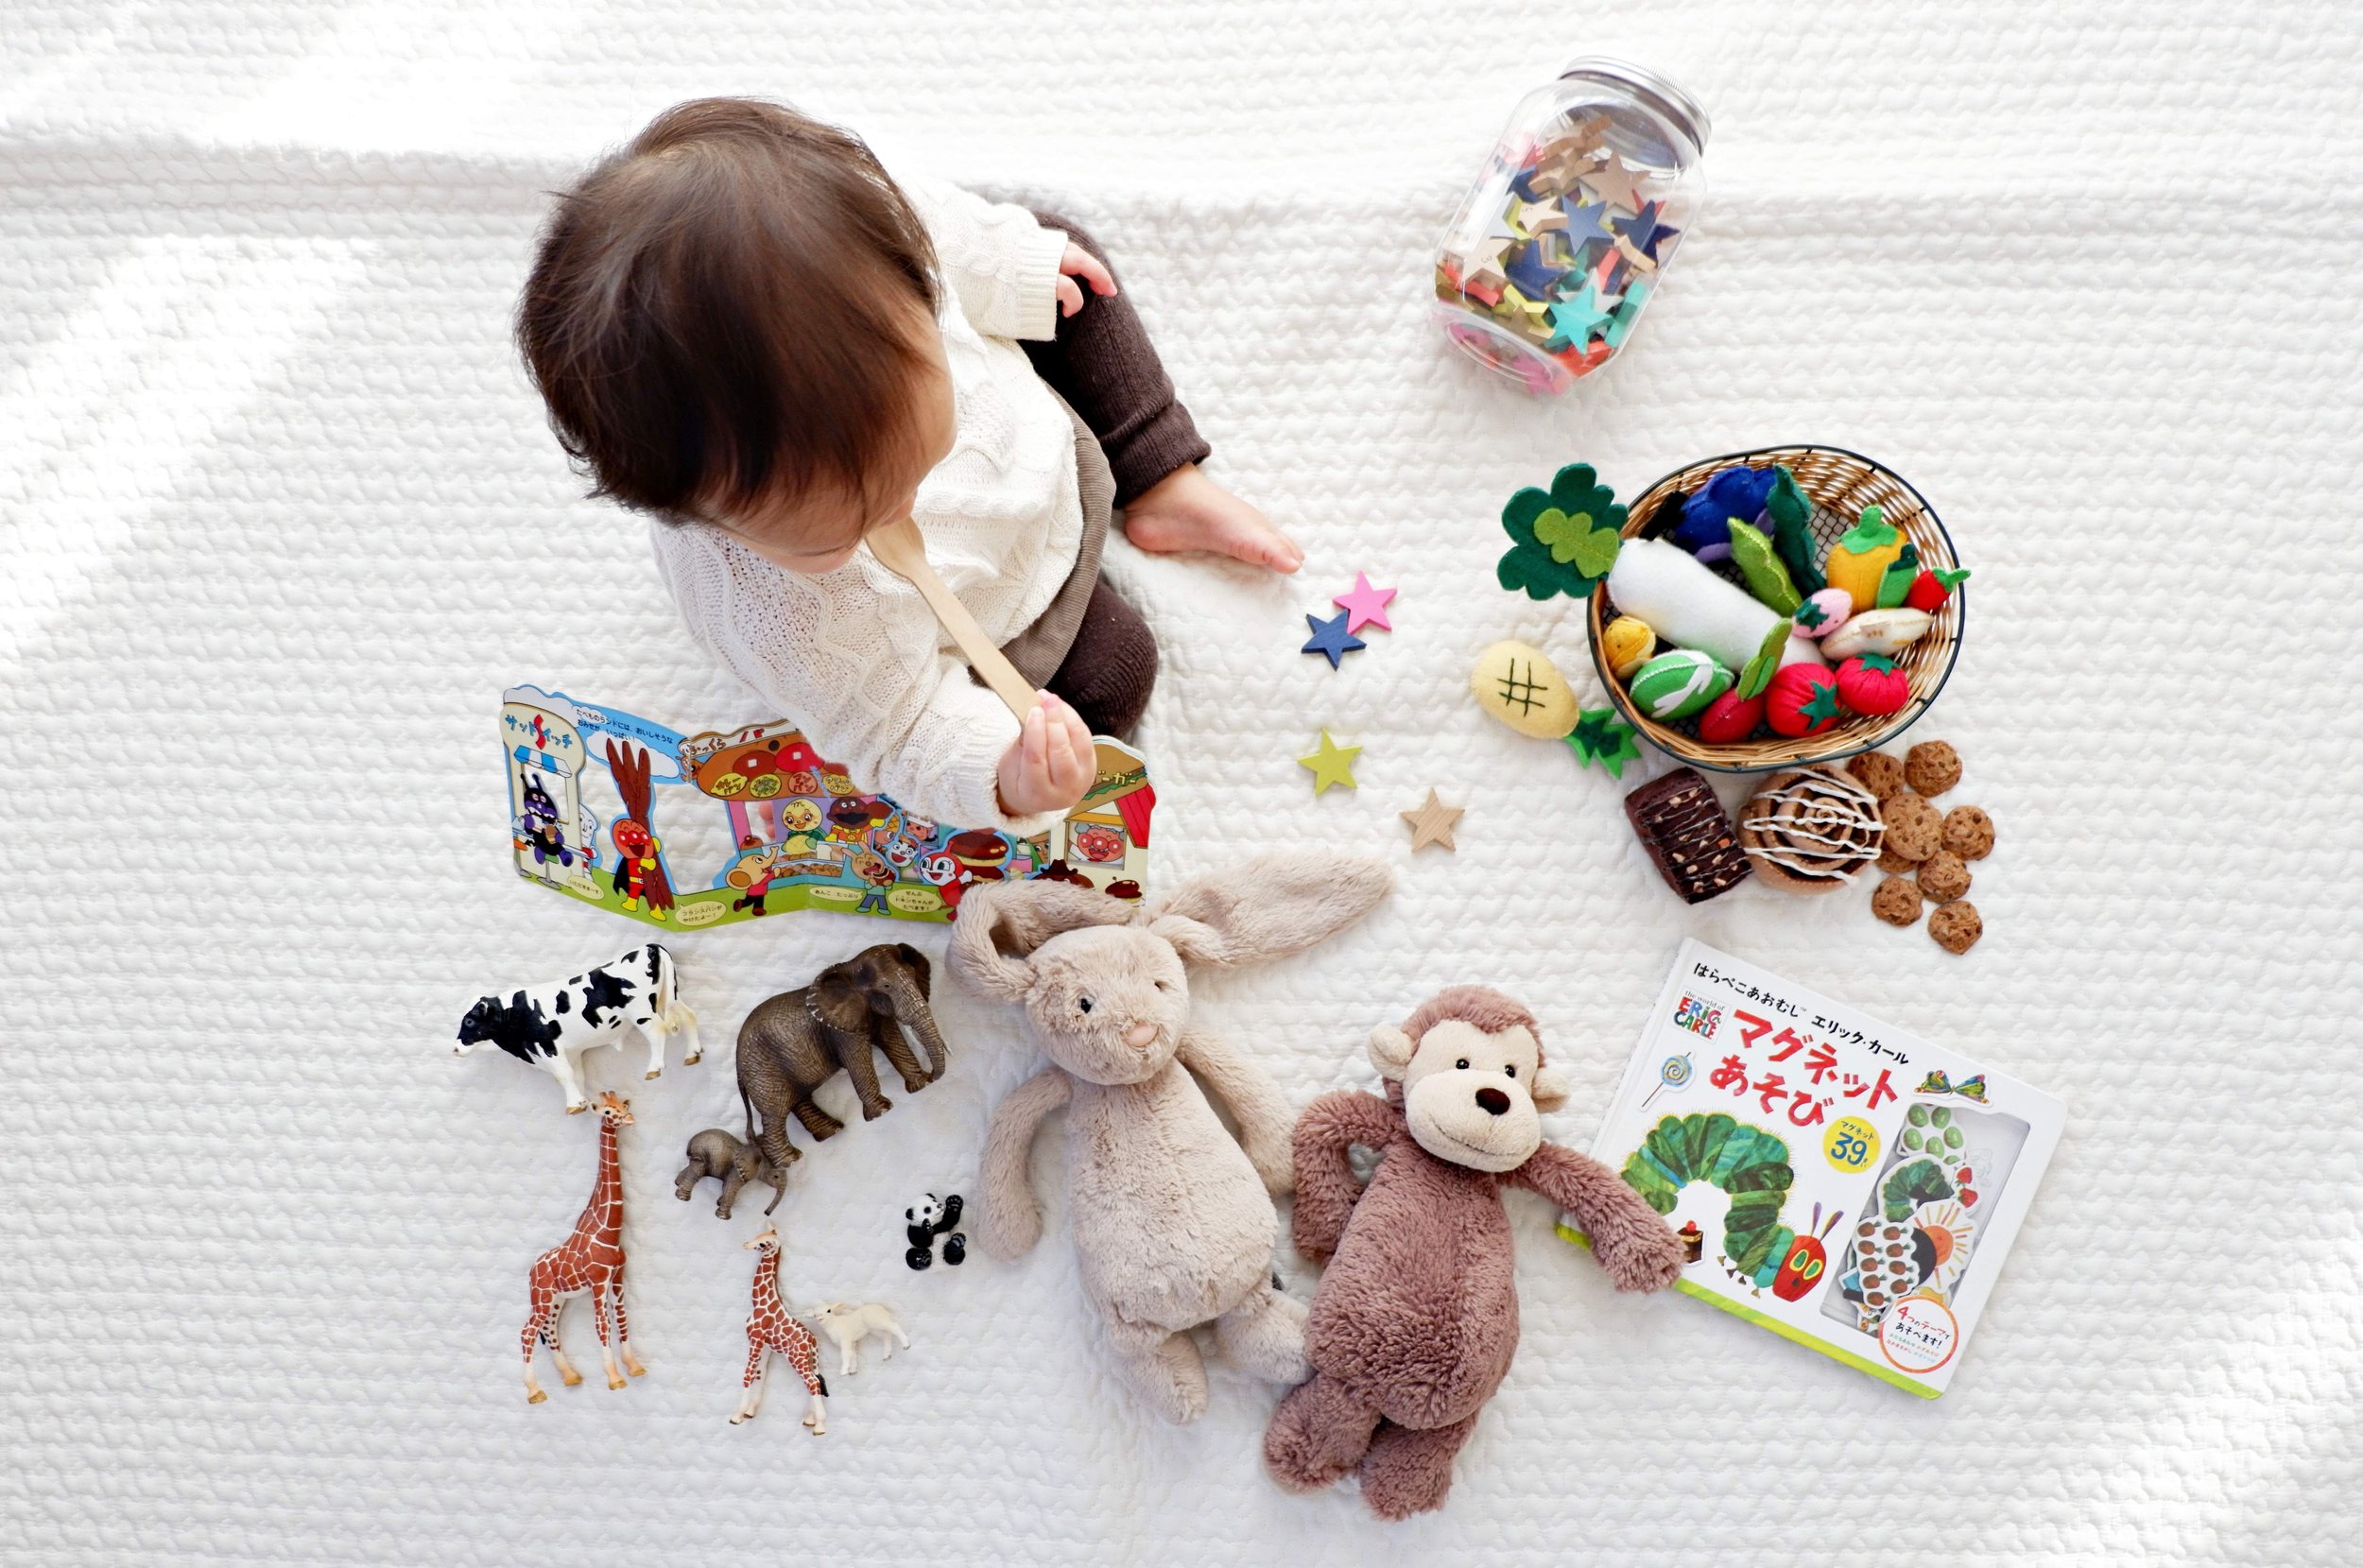 diy sensory activities for 1 year old